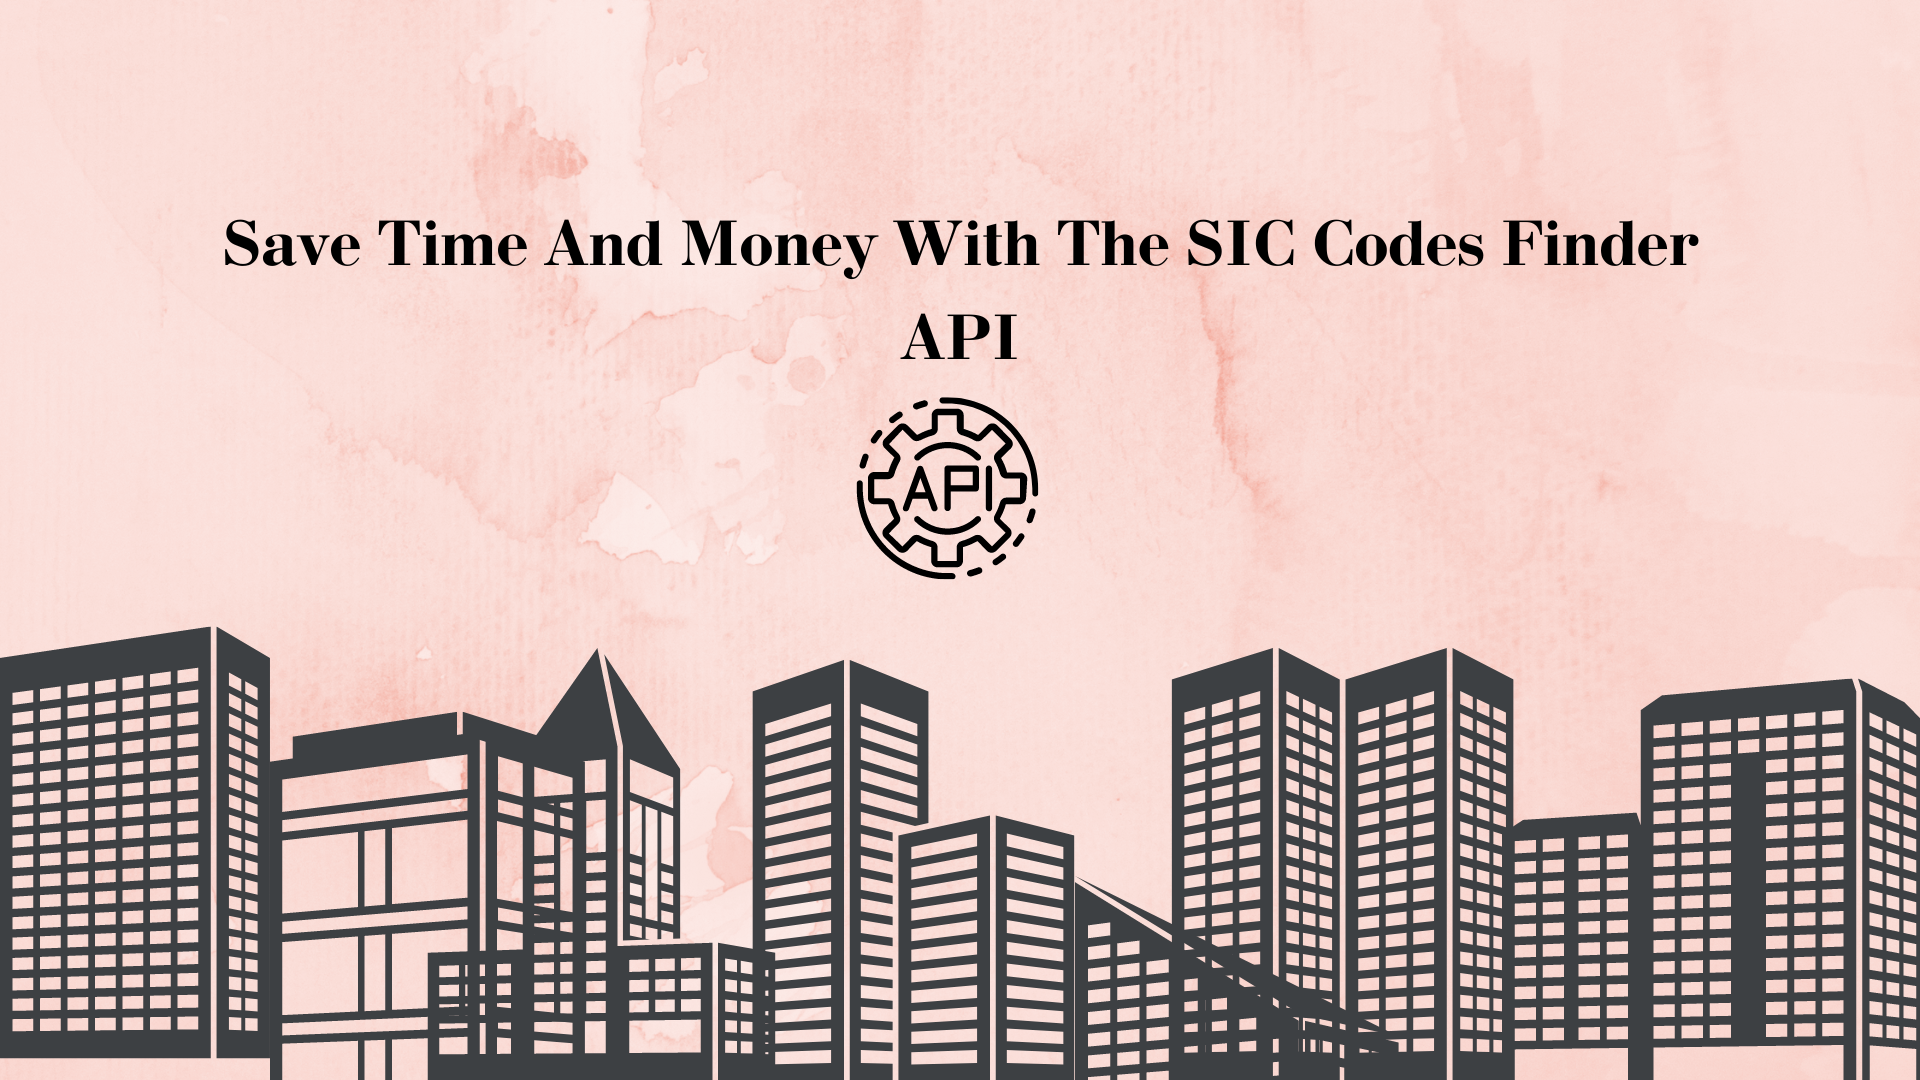 Save Time And Money With The SIC Codes Finder API